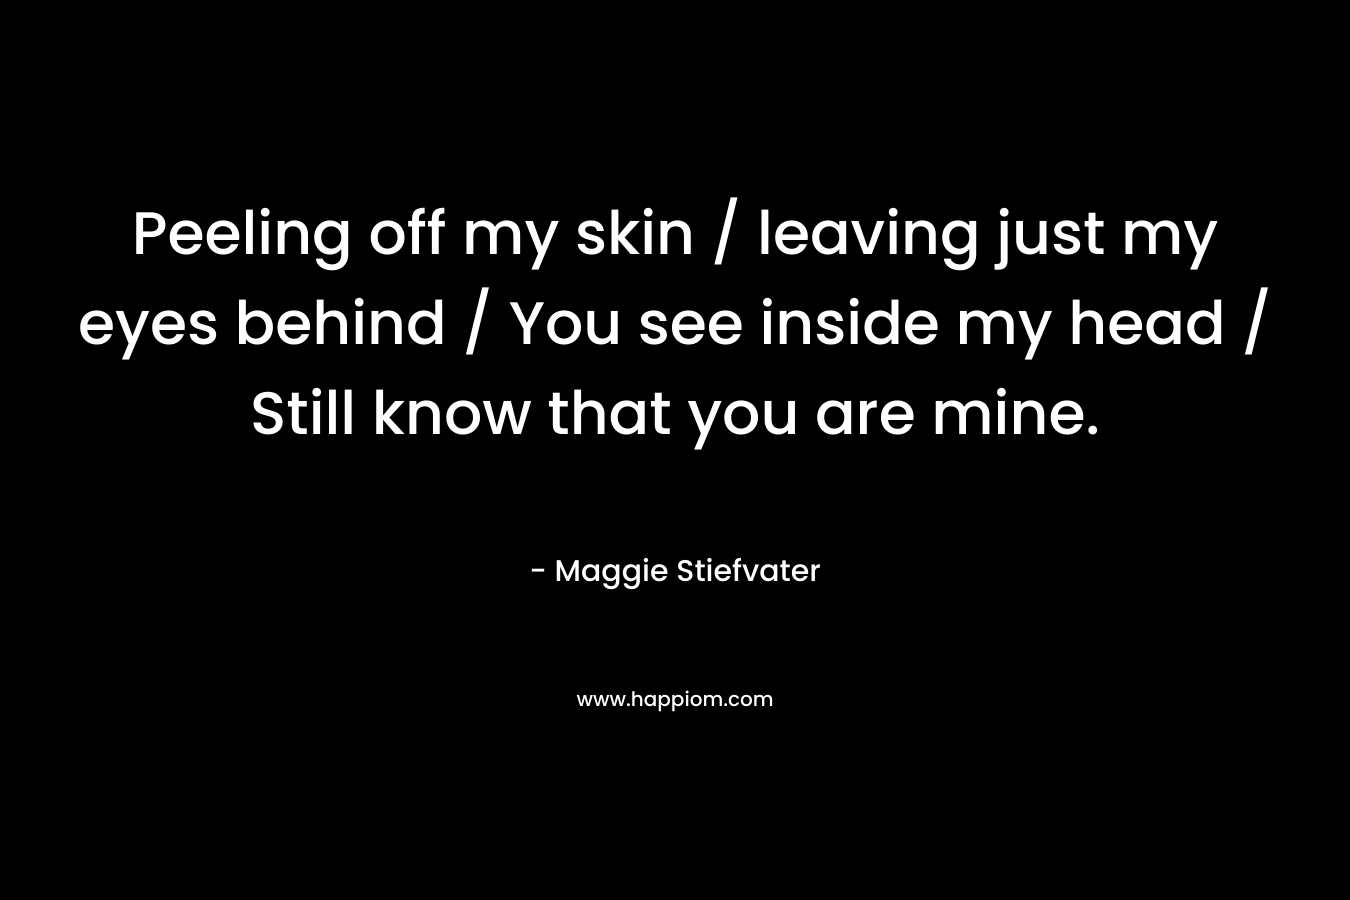 Peeling off my skin / leaving just my eyes behind / You see inside my head / Still know that you are mine. – Maggie Stiefvater